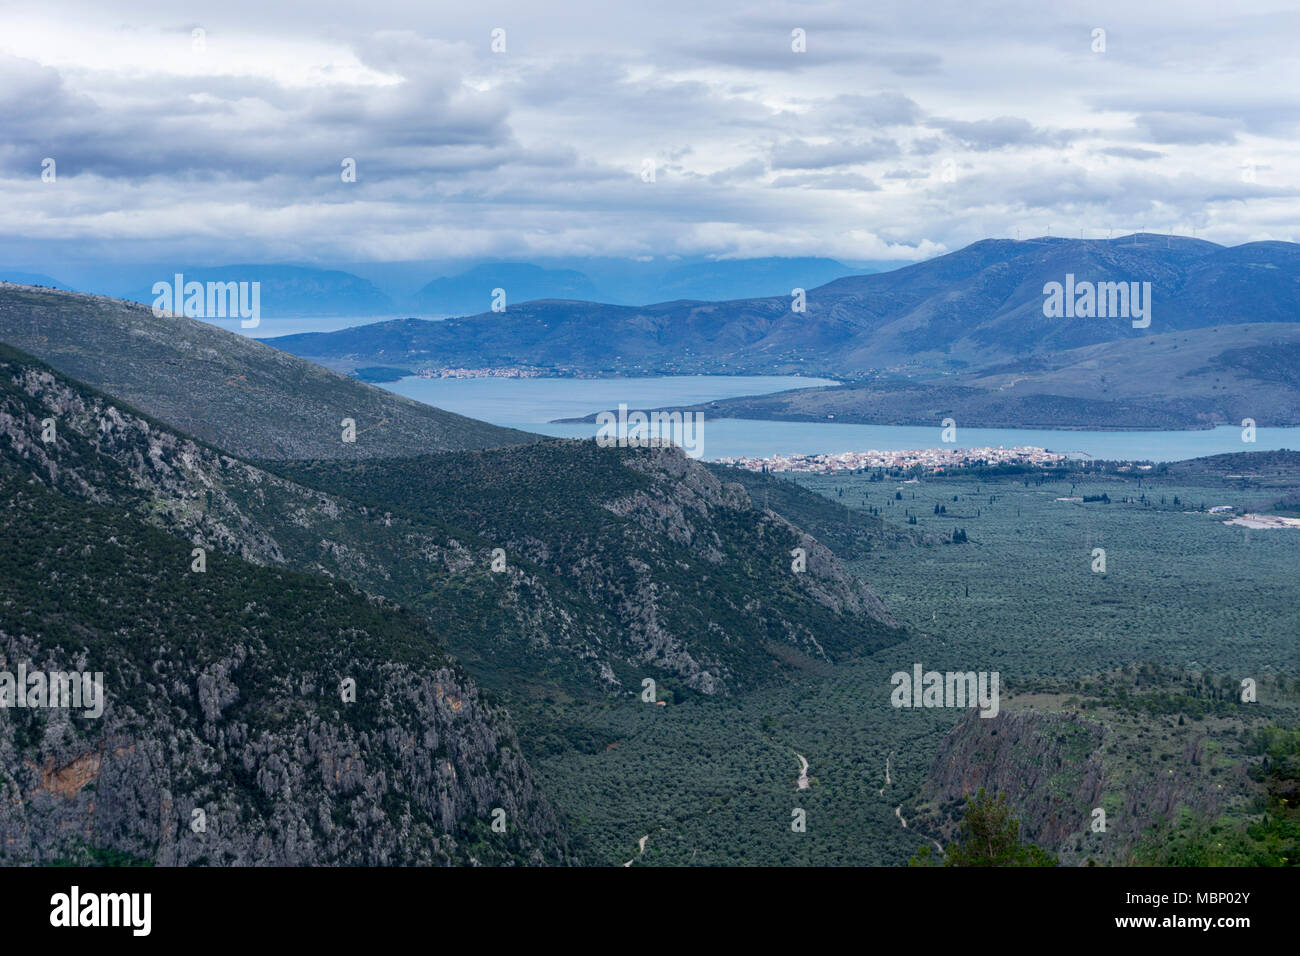 Delphi, Phocis - Greece. Panoramic view from Delphi town of the olive groves of Phocis and the Itea bay along with the villages Itea and Galaxidi Stock Photo